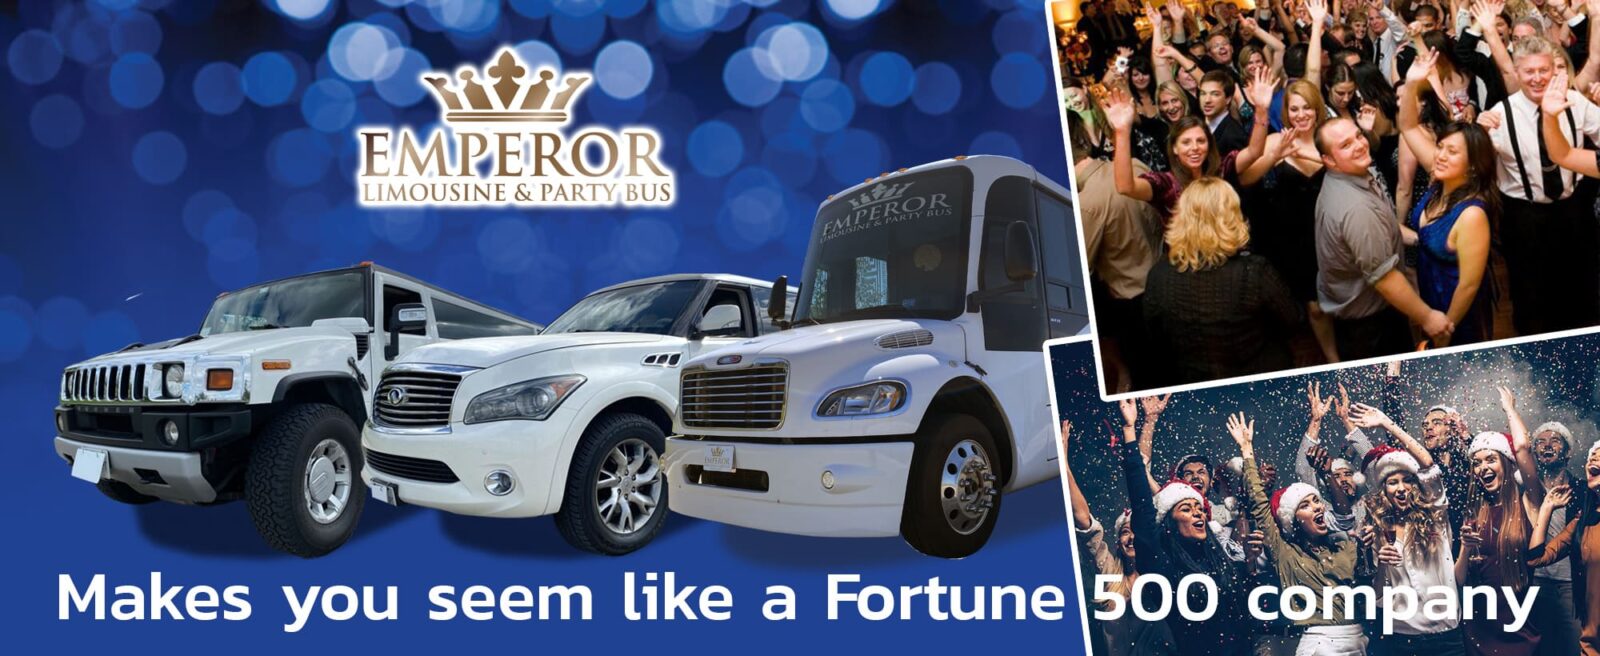 Corporate Party Bus & Limousine - limo service chicago